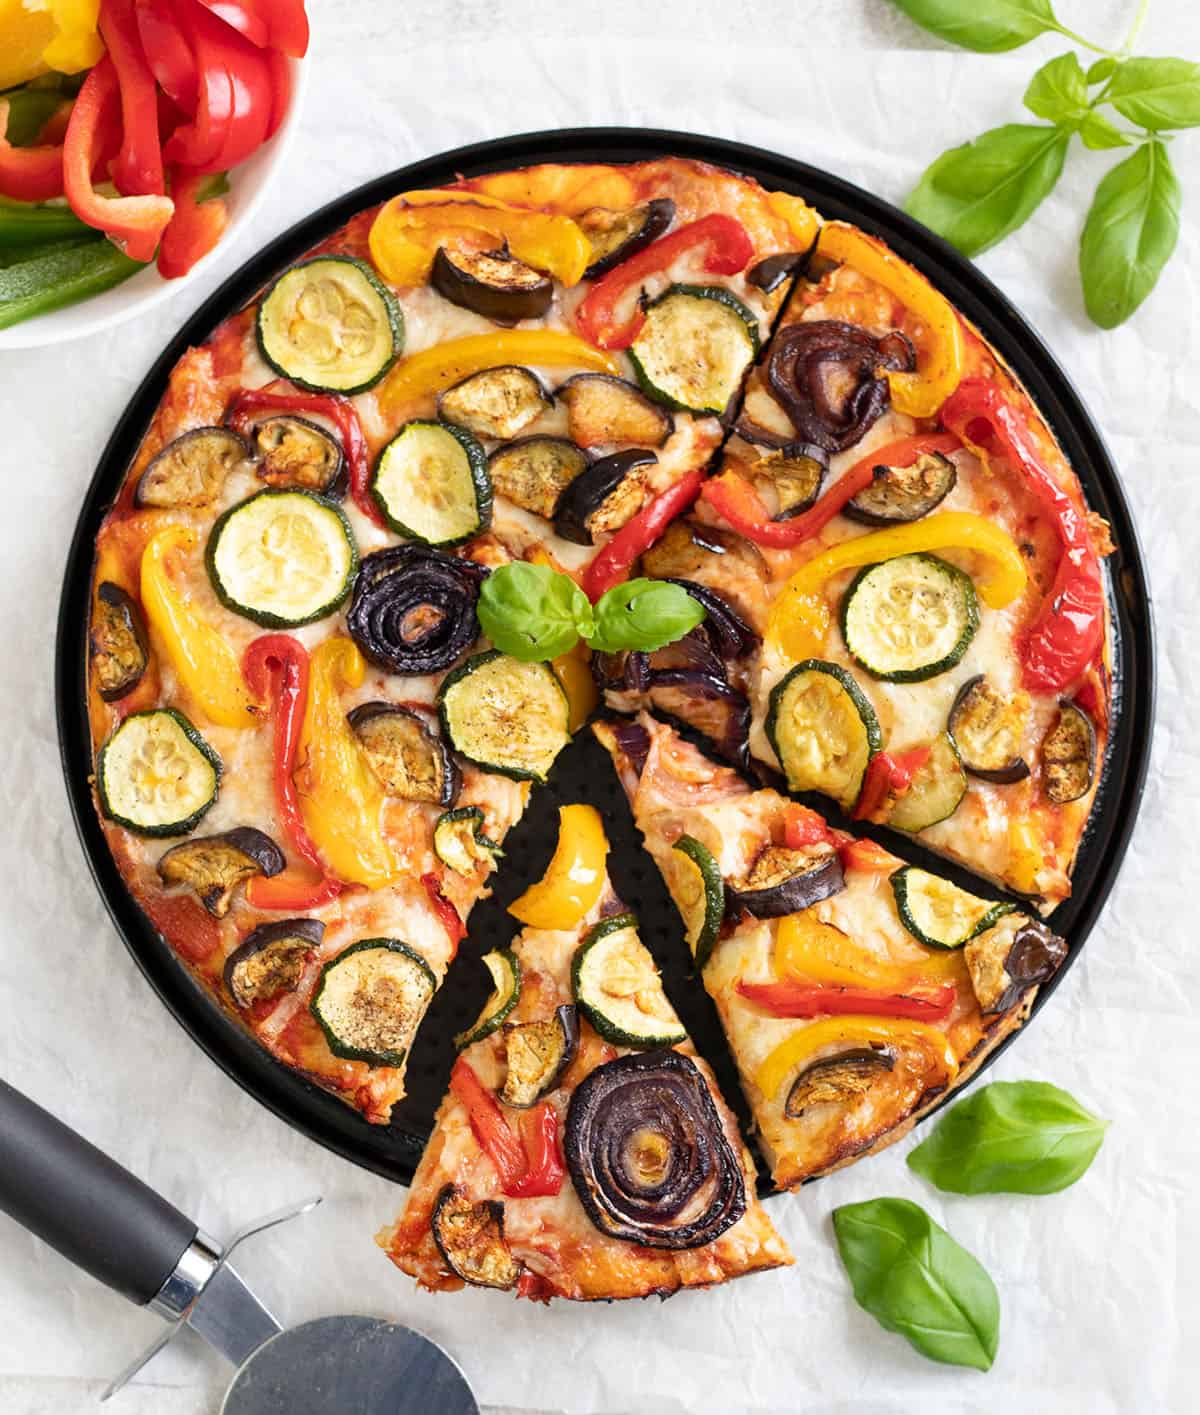 Roasted Vegetable Pizza topped with roasted veggies, cheese and pizza sauce.